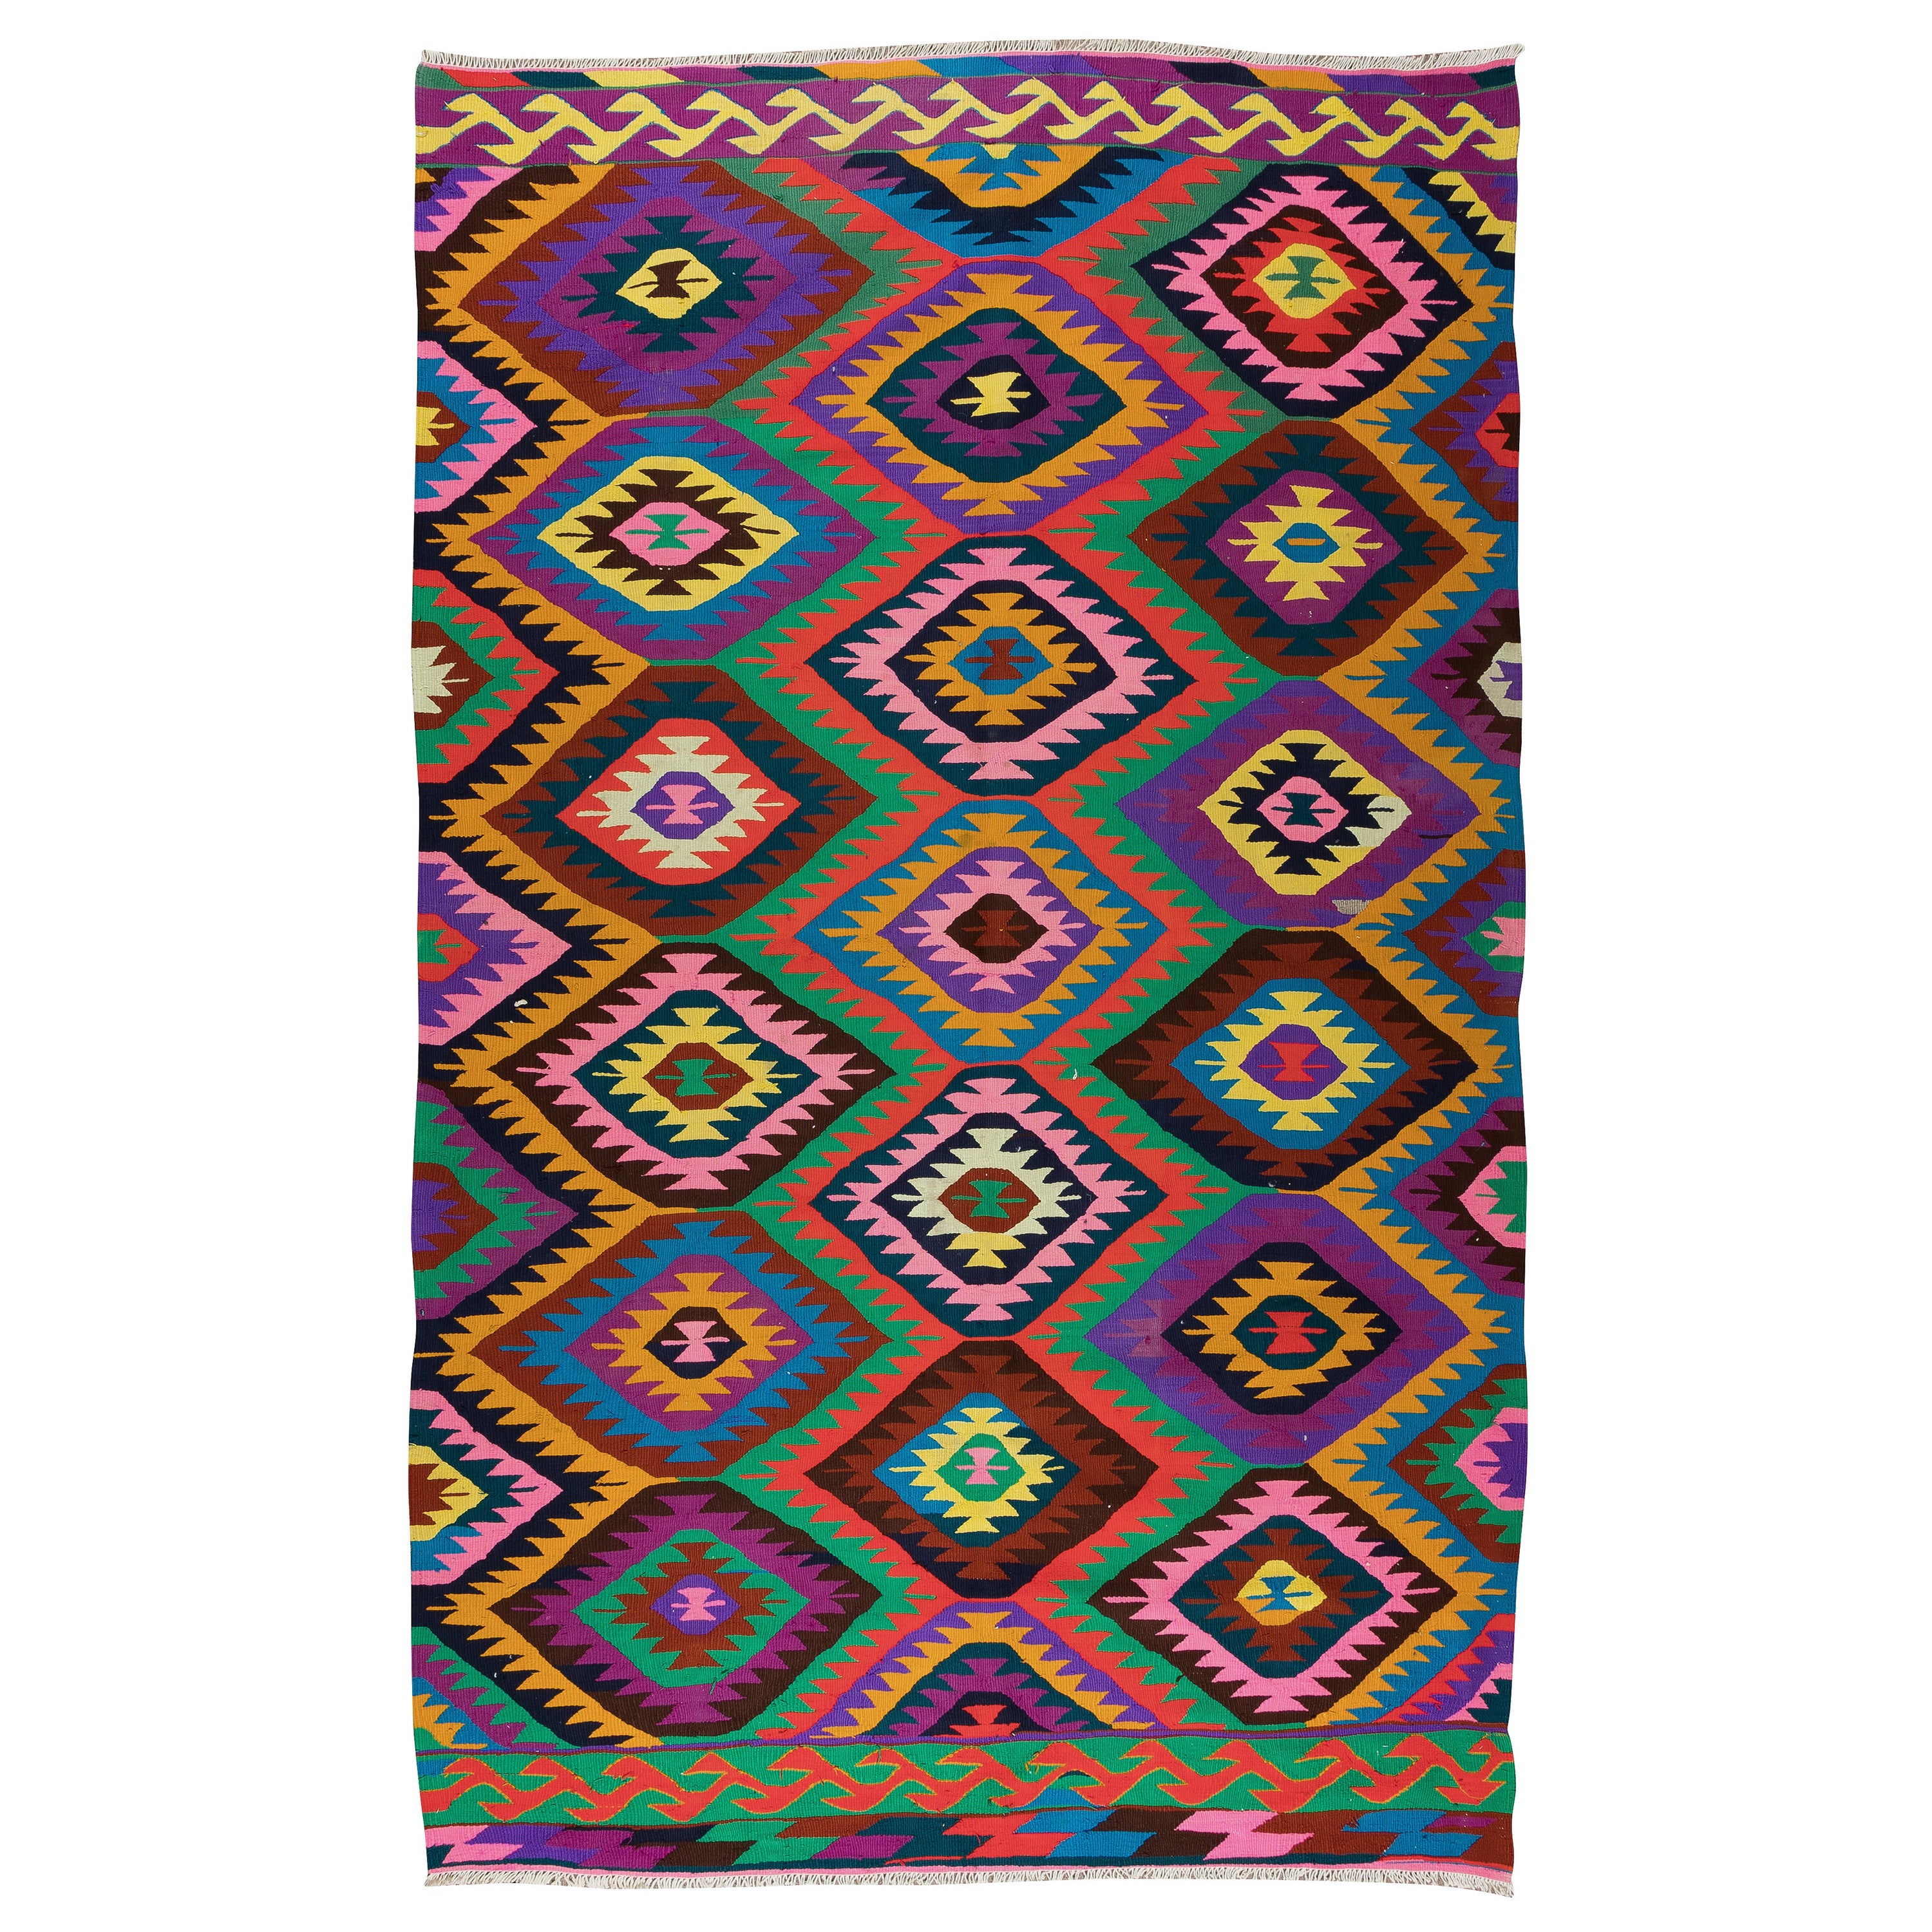 5.4x8.8 Ft Dazzling Handmade Turkish Kilim. Colorful Flat-Weave Rug. All Wool For Sale